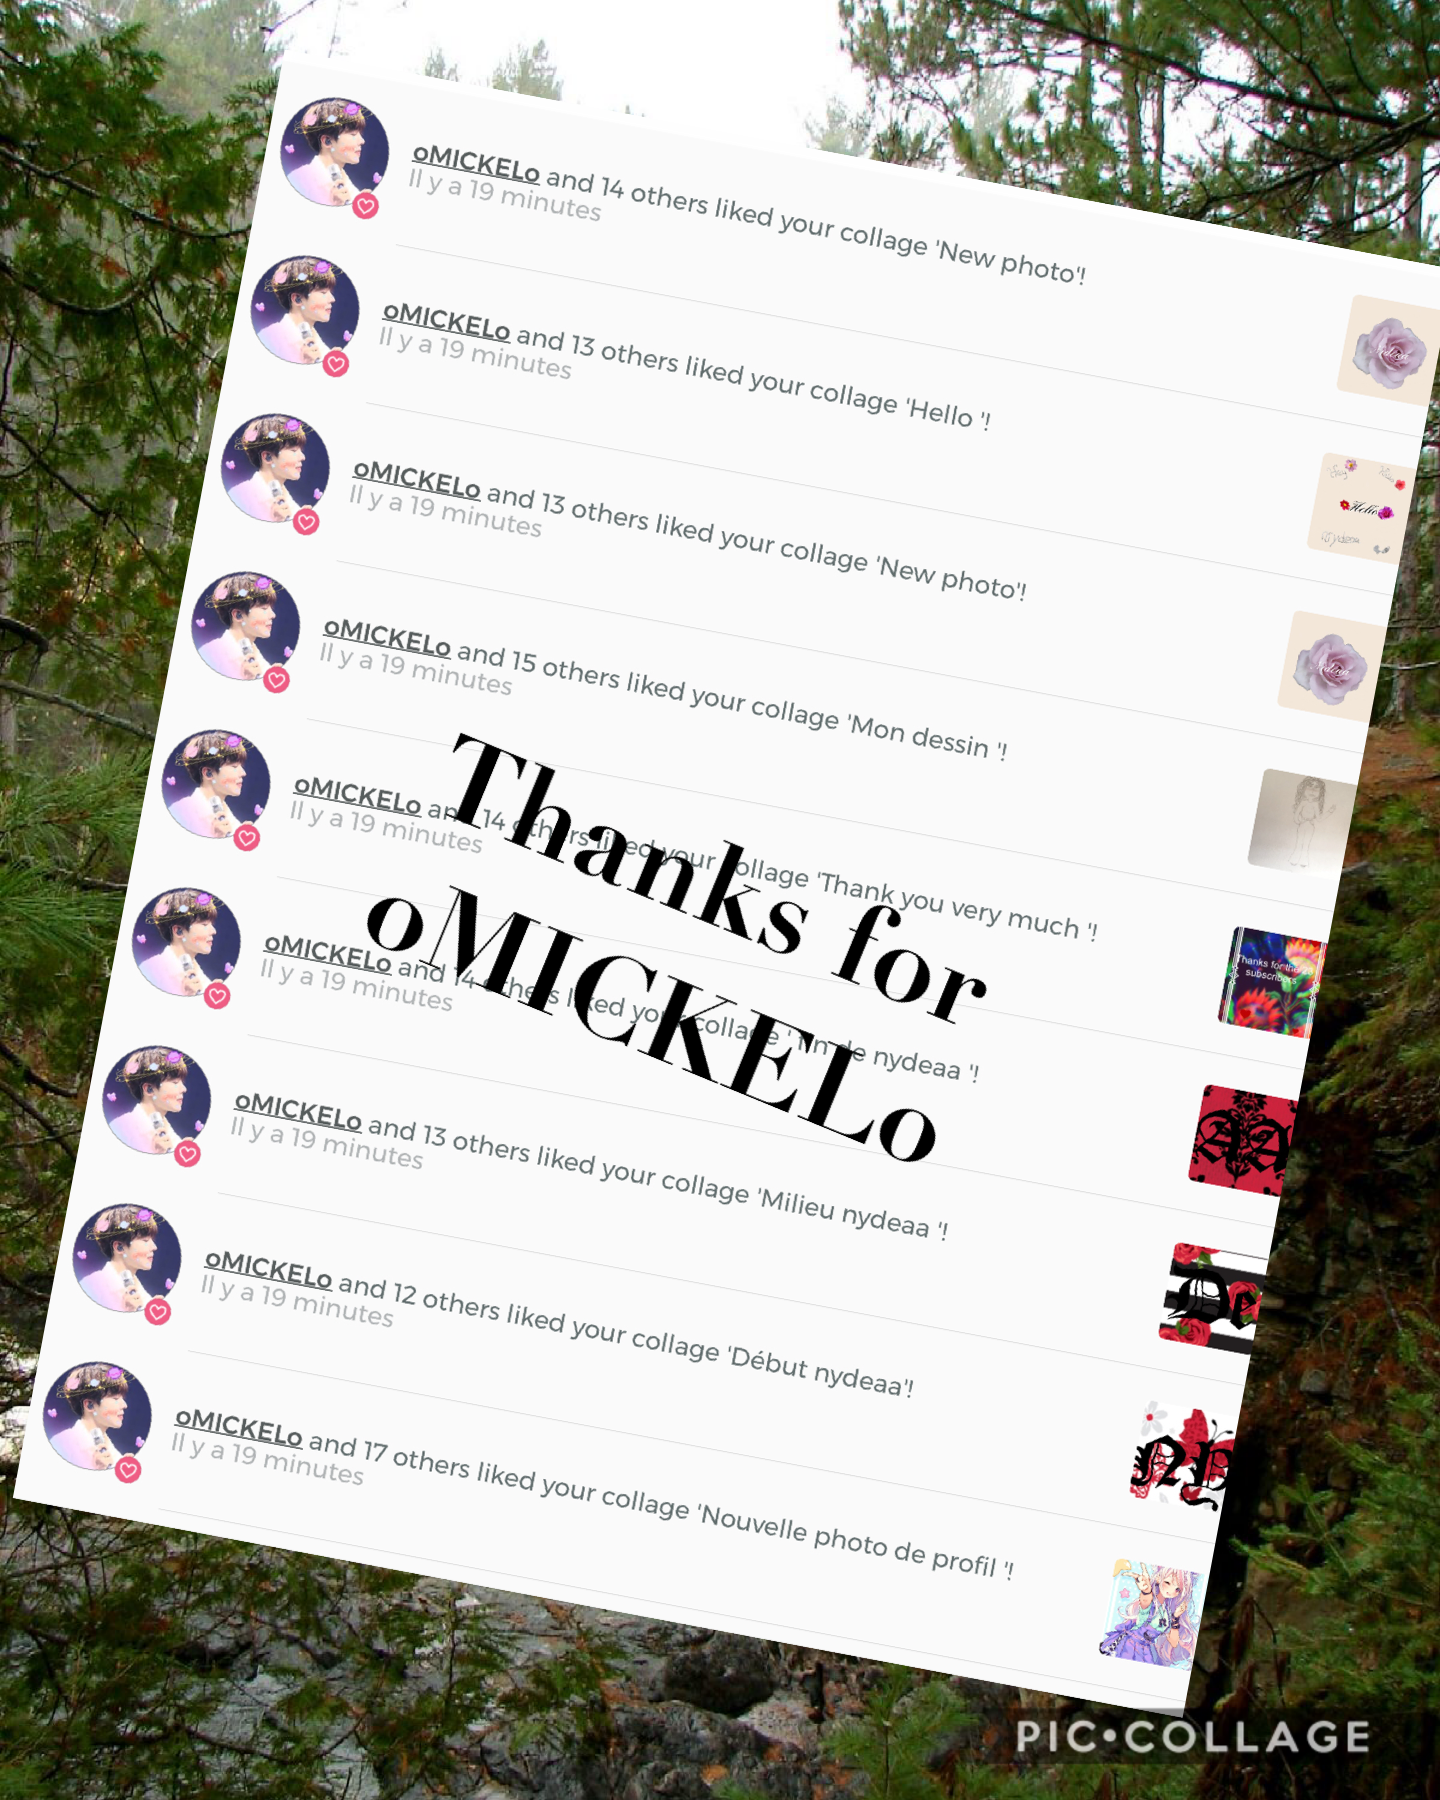 Thanks for oMICKELo